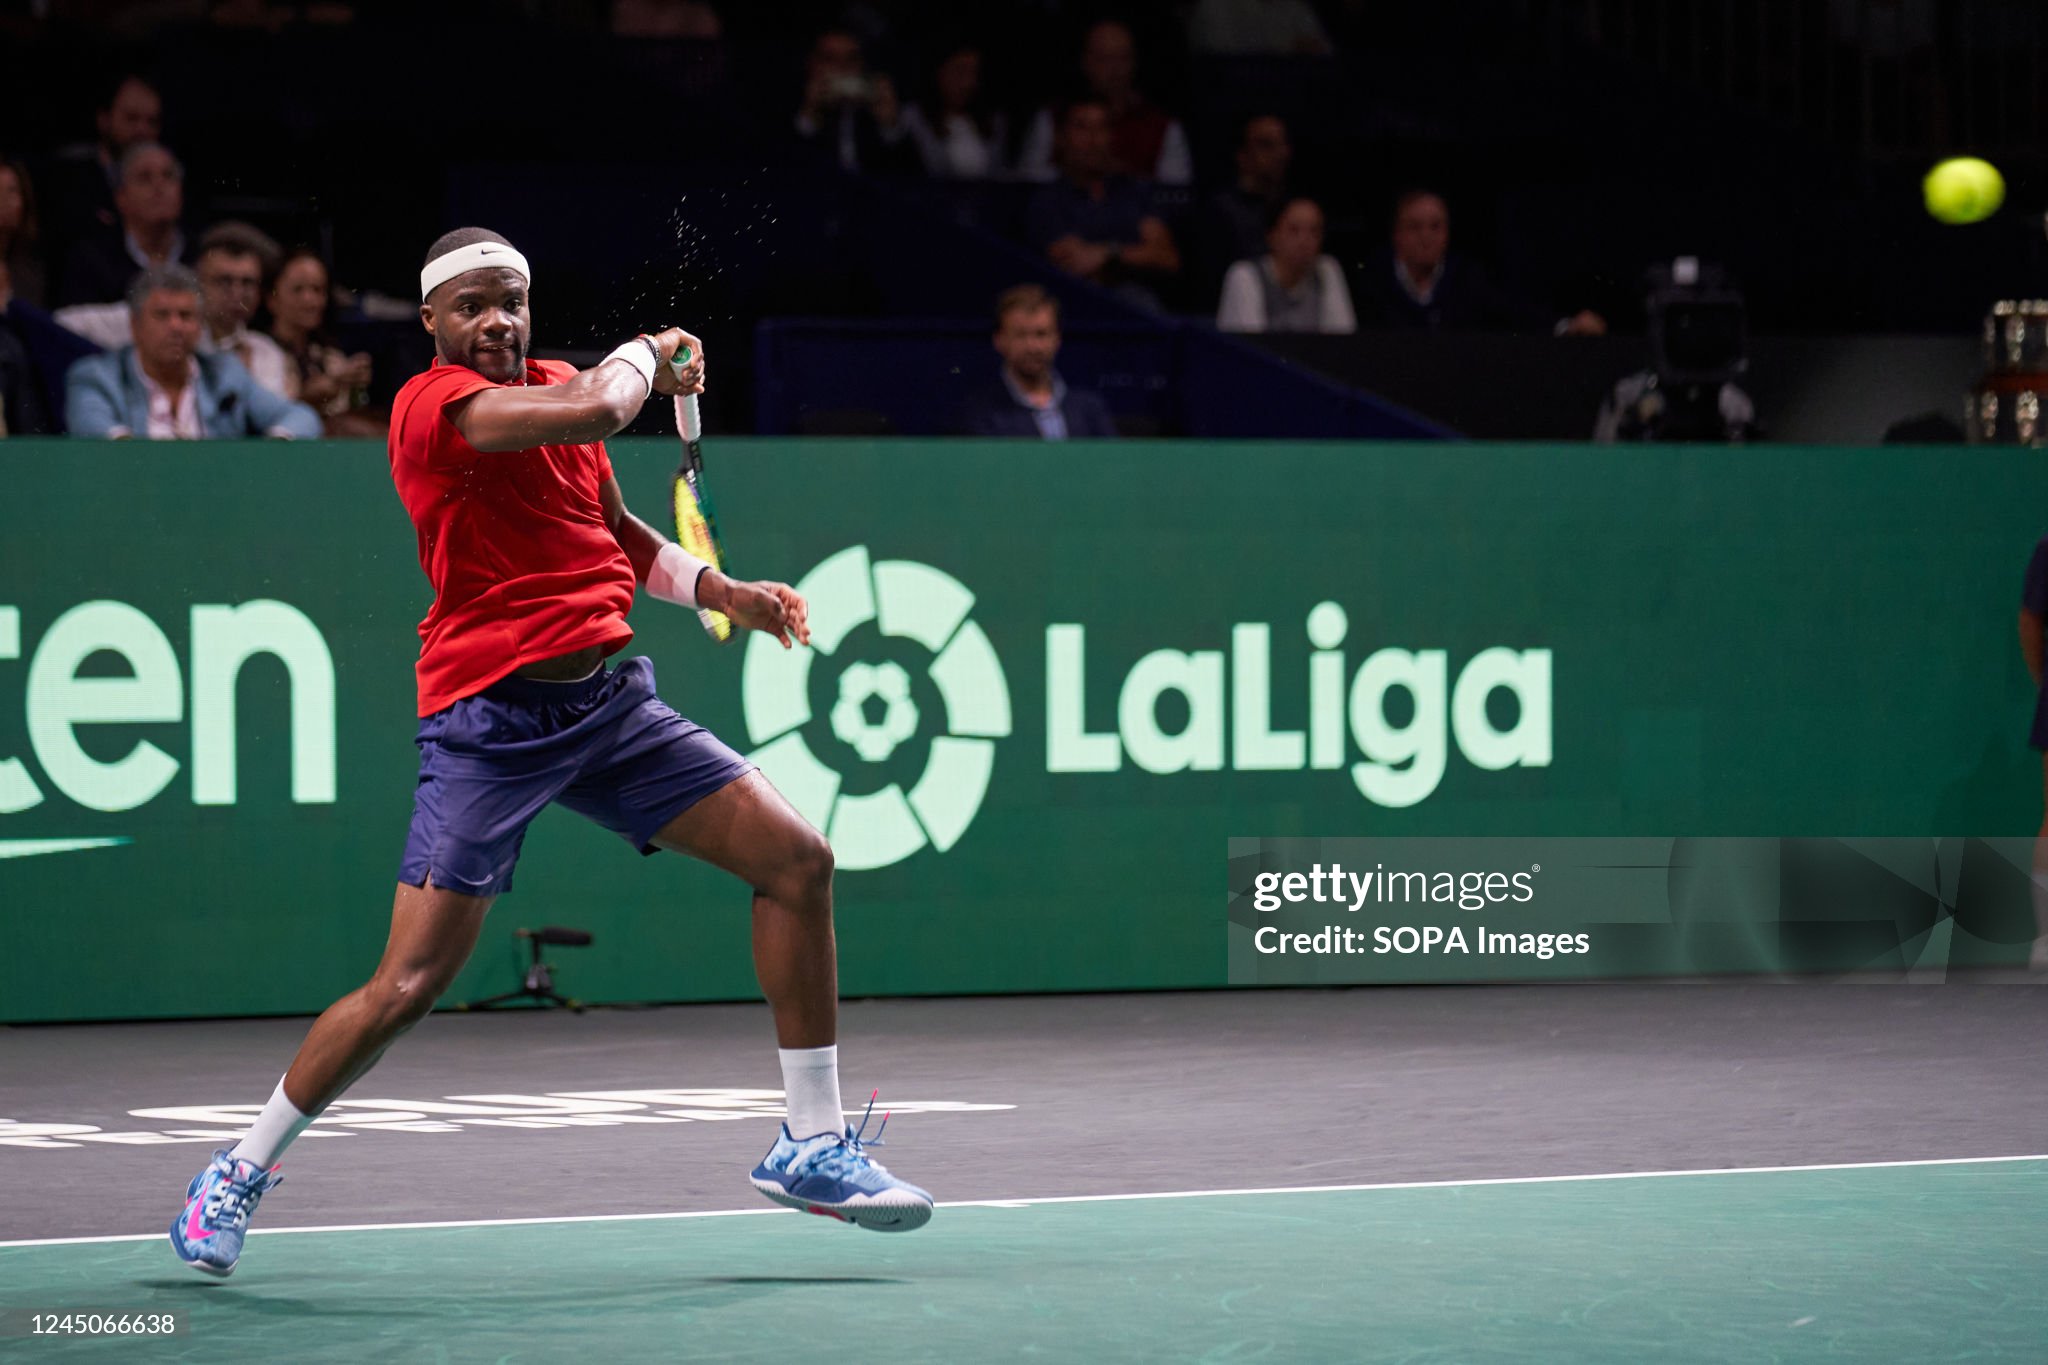 frances-tiafoe-of-usa-in-action-against-lorenzo-sonego-of.jpg